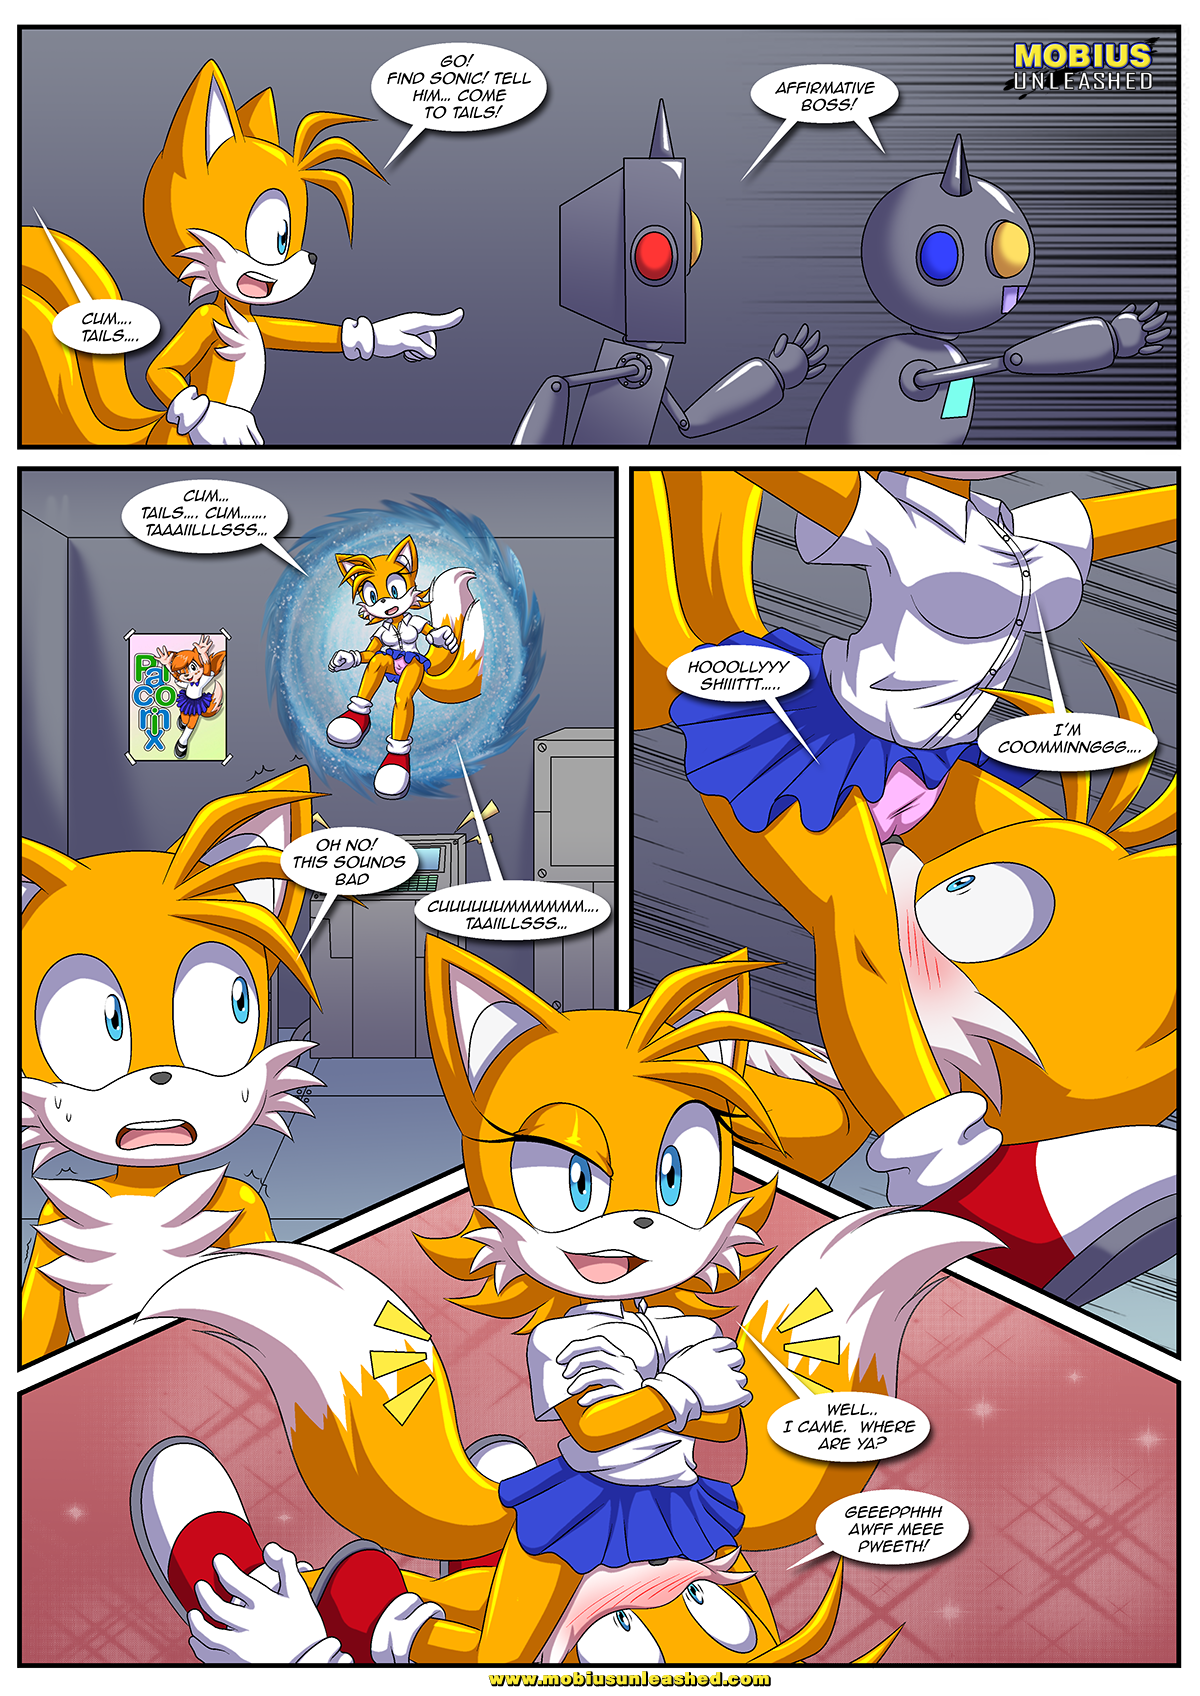 Mobius unleashed comic